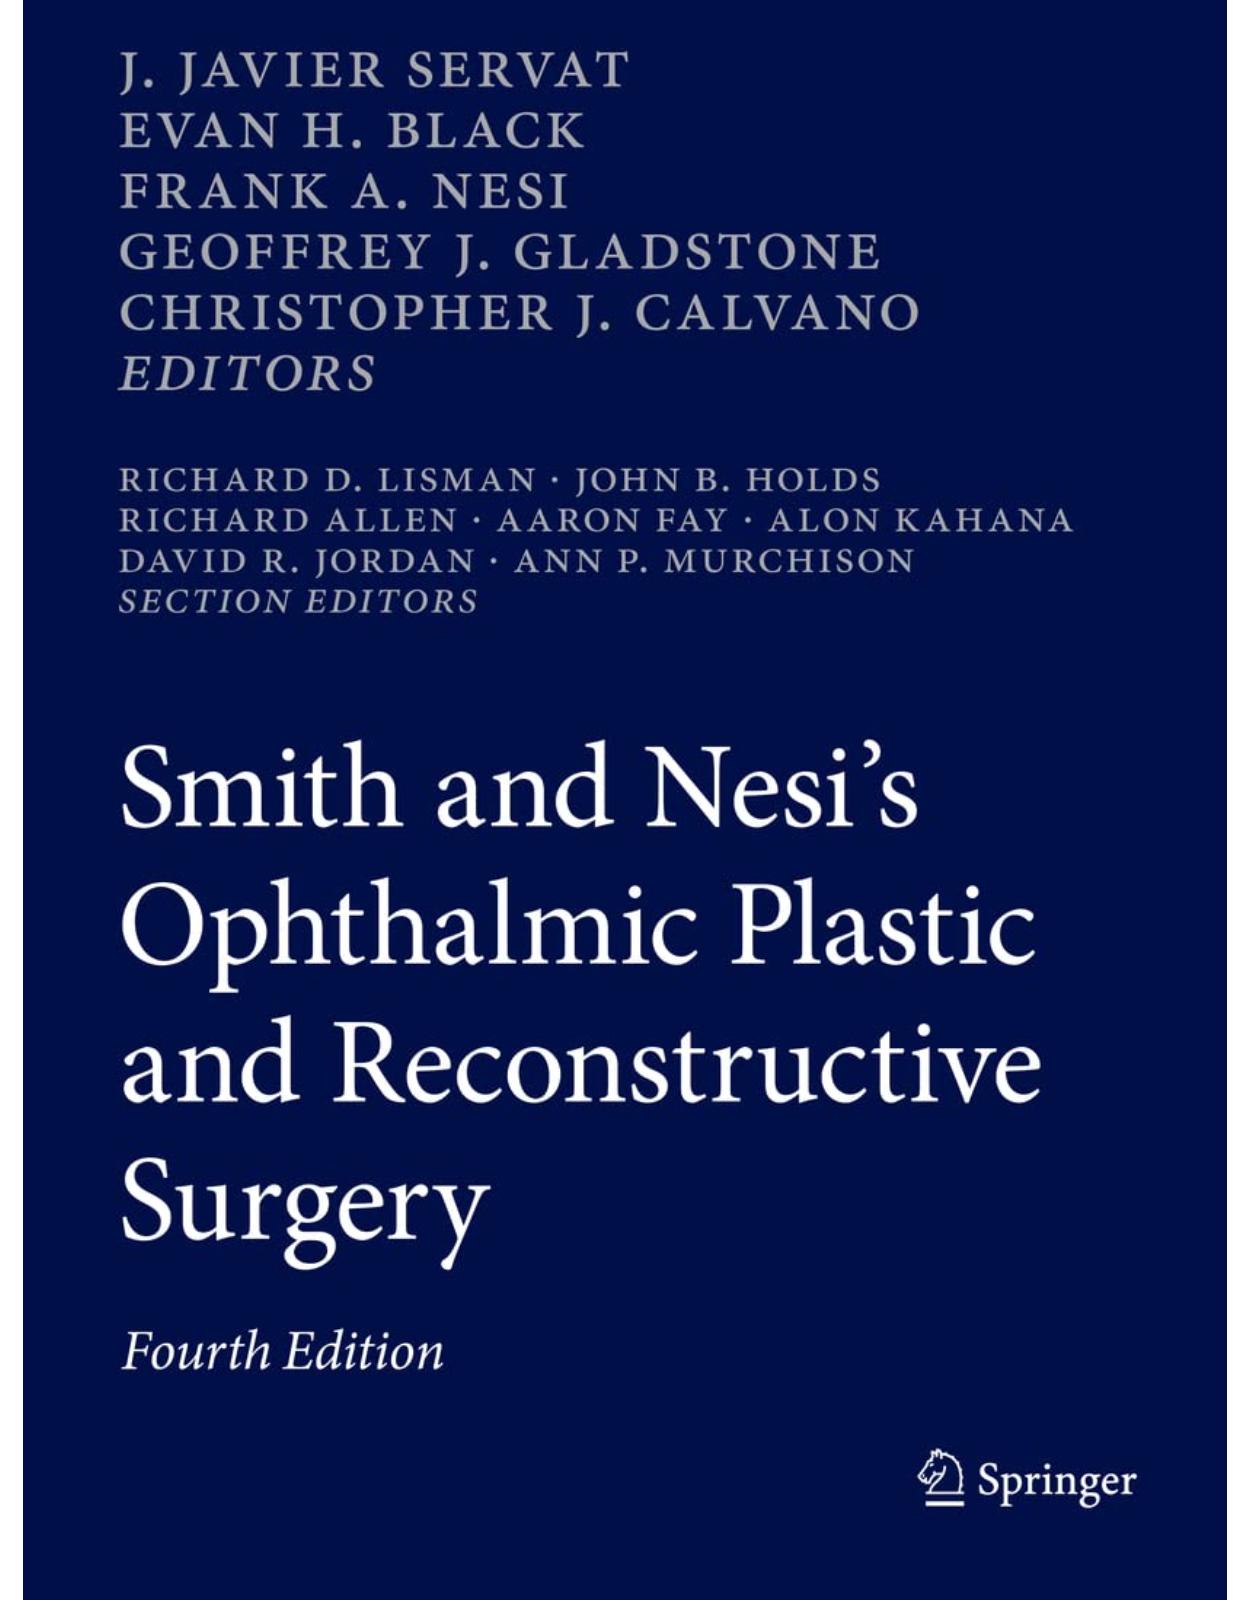 Smith and Nesi’s Ophthalmic Plastic and Reconstructive Surgery 